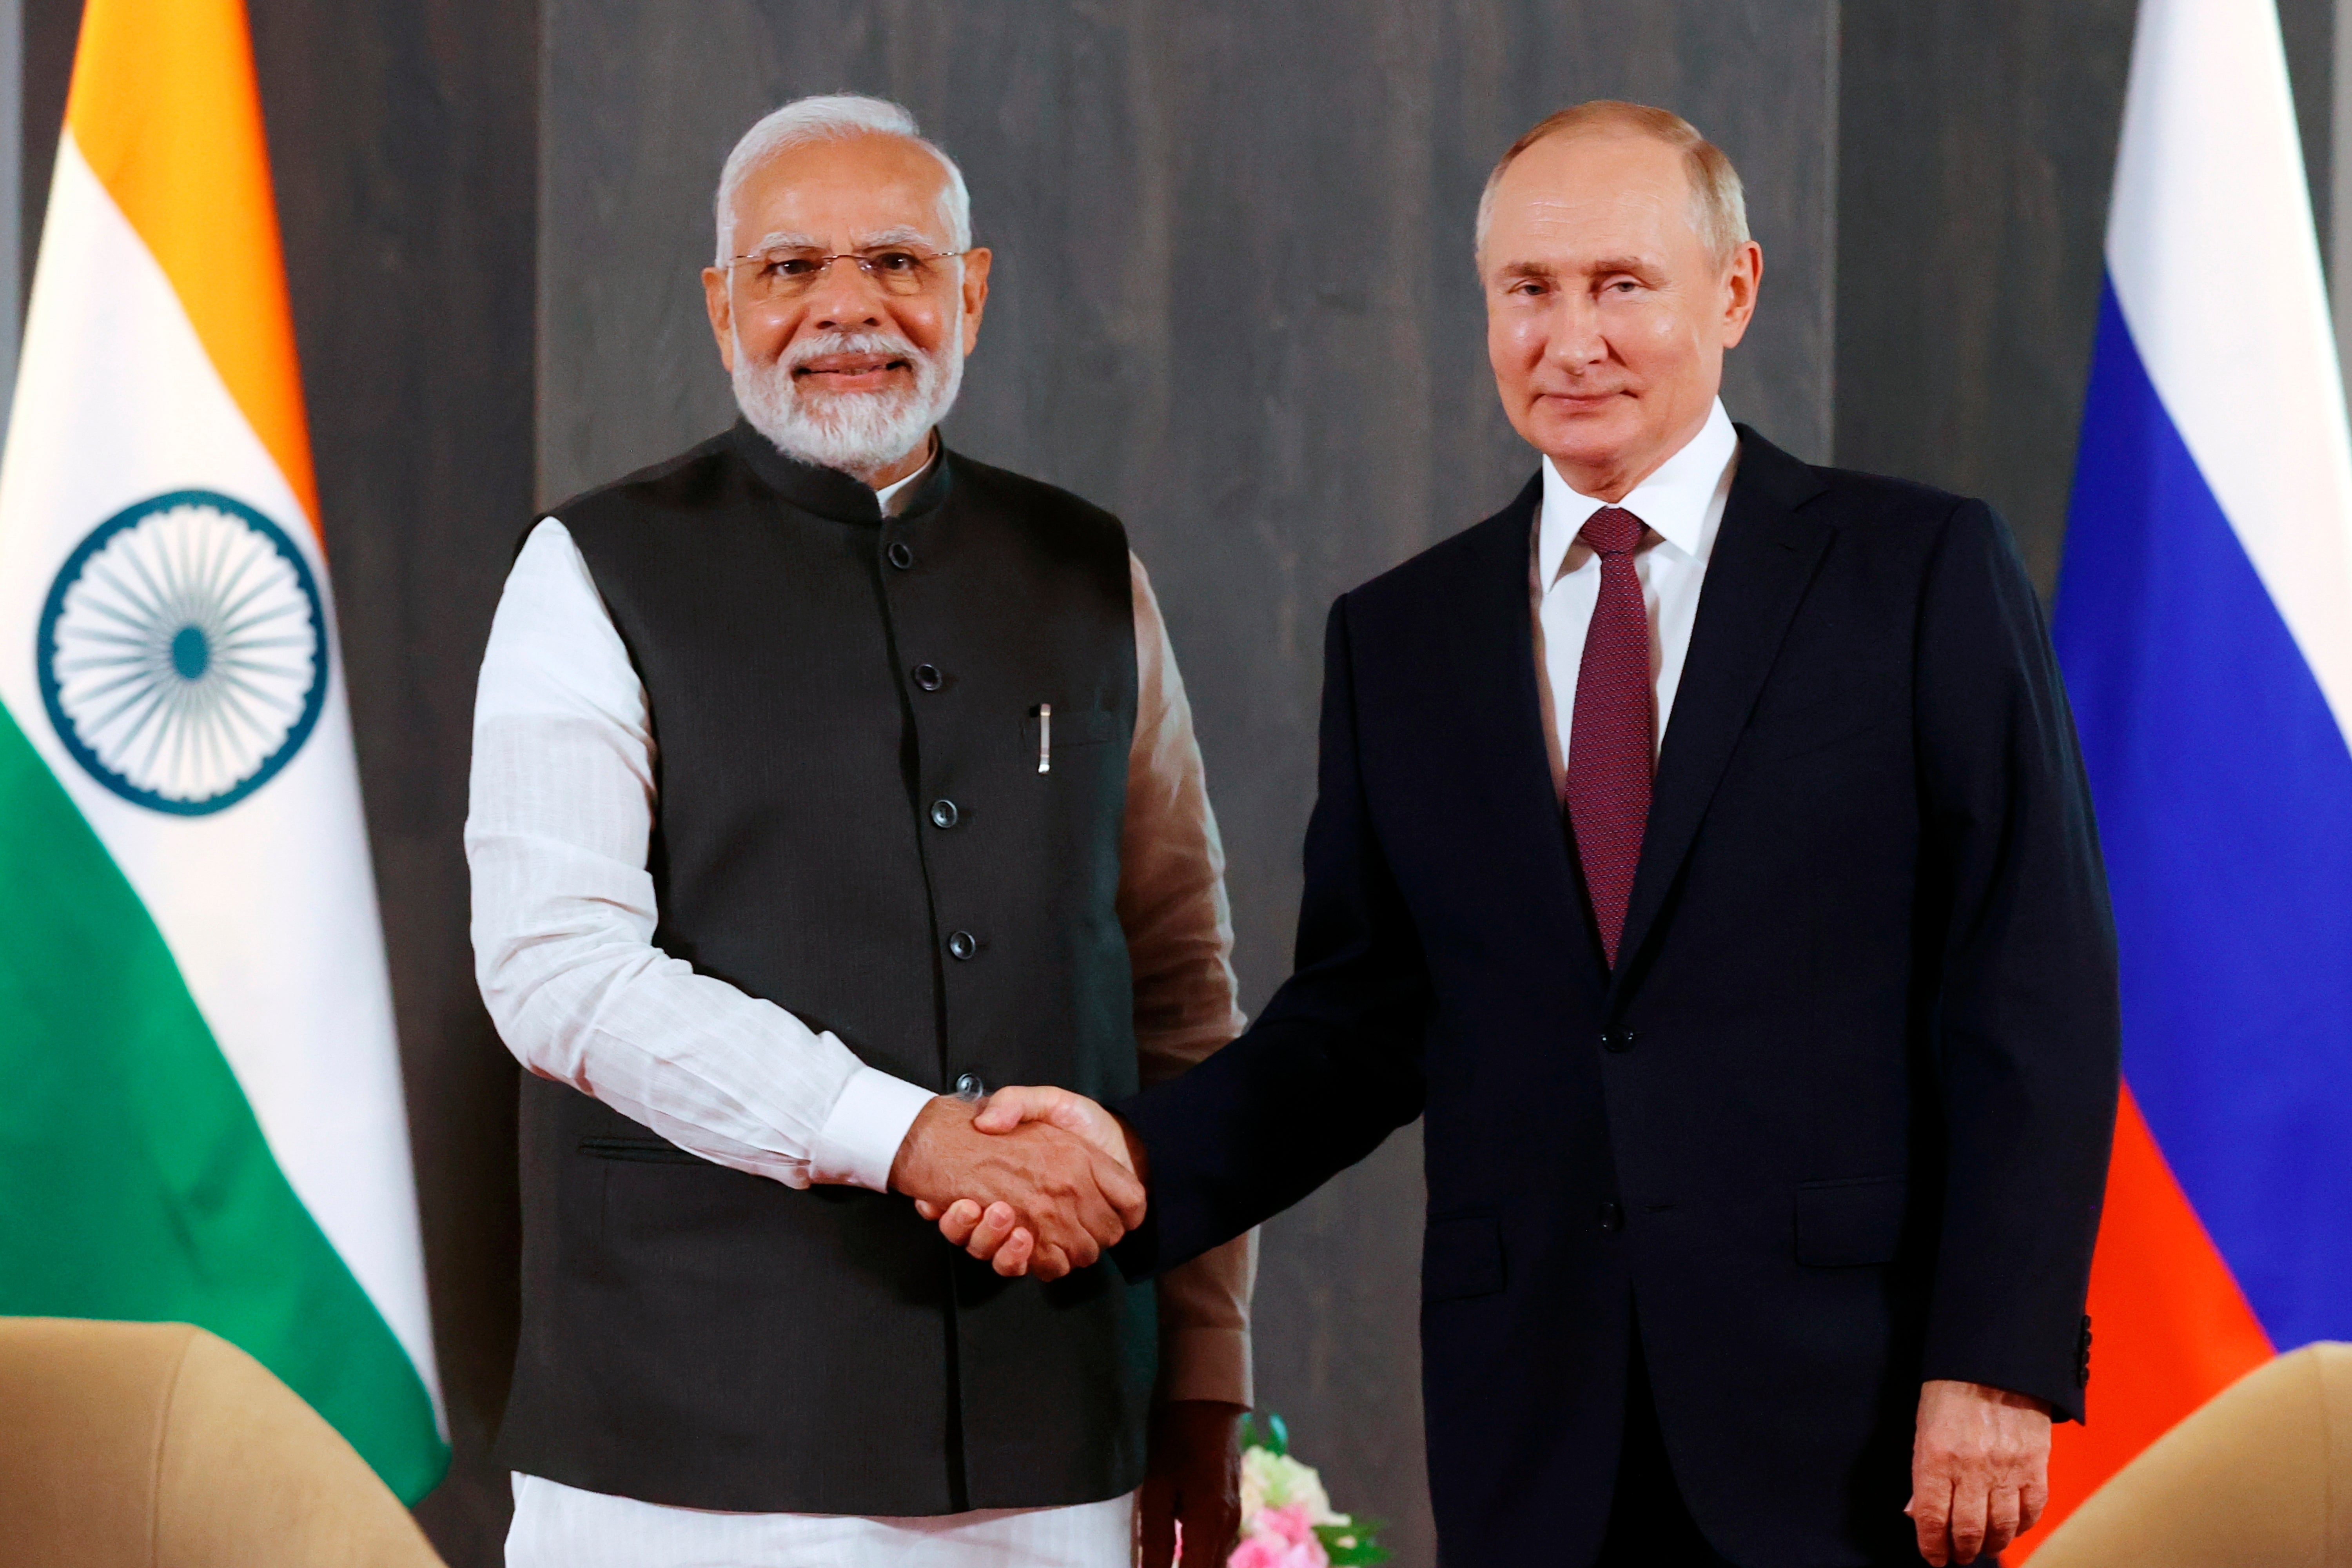 File Russian president Vladimir Putin, right, and Indian prime minister Narendra Modi pose for a photo shaking hands prior to their talks on the sidelines of the Shanghai Cooperation Organisation (SCO) summit in Samarkand, Uzbekistan, on 16 September 2022.